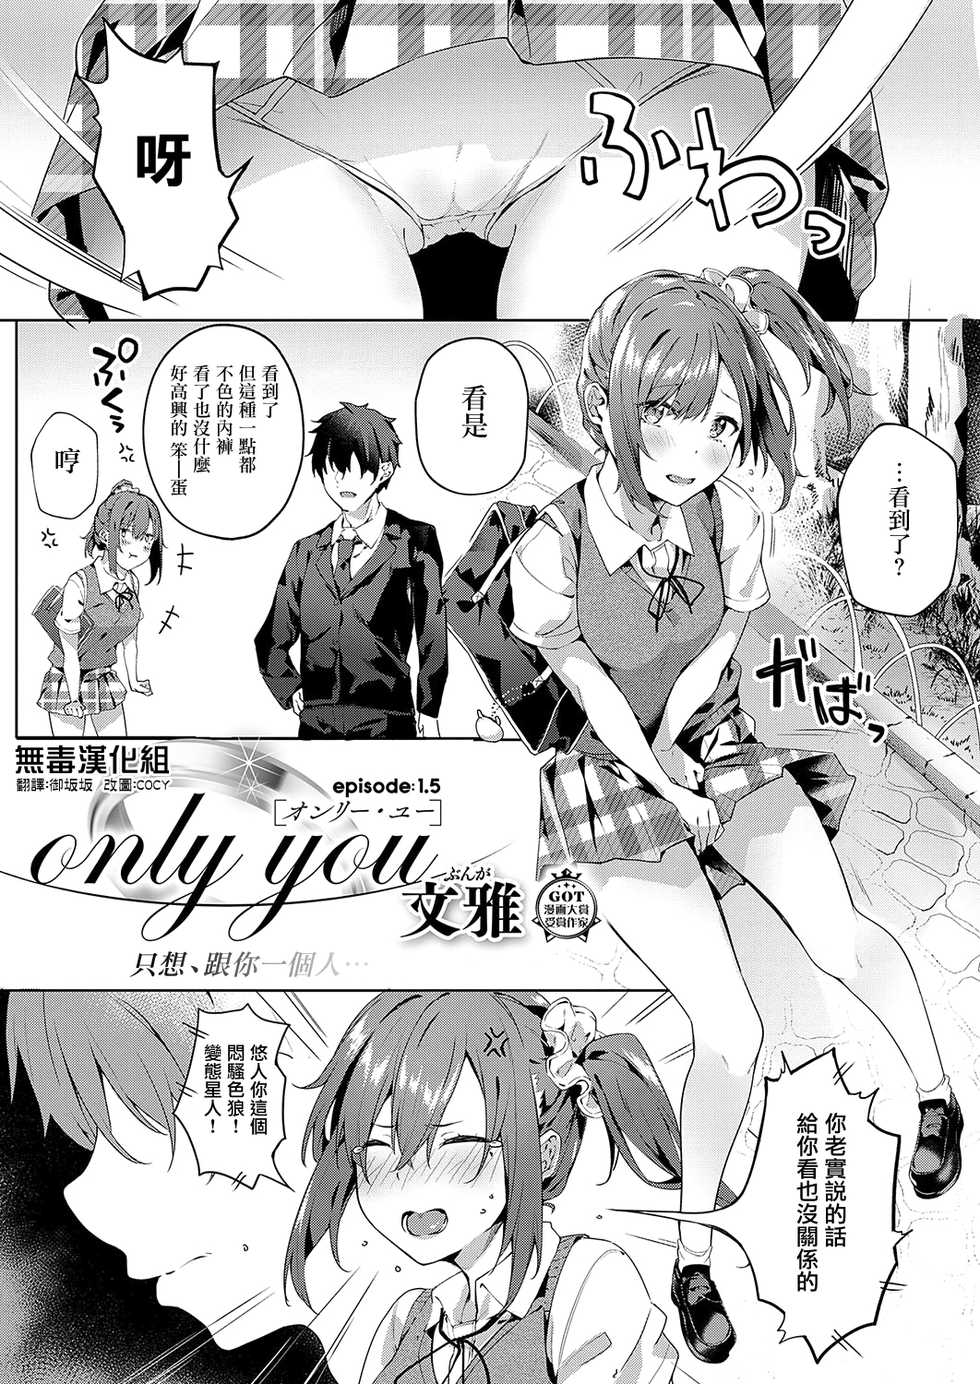 [Bunga] only you 1.5 (COMIC ExE 19) [Chinese] [无毒汉化组] [Digital] - Page 1